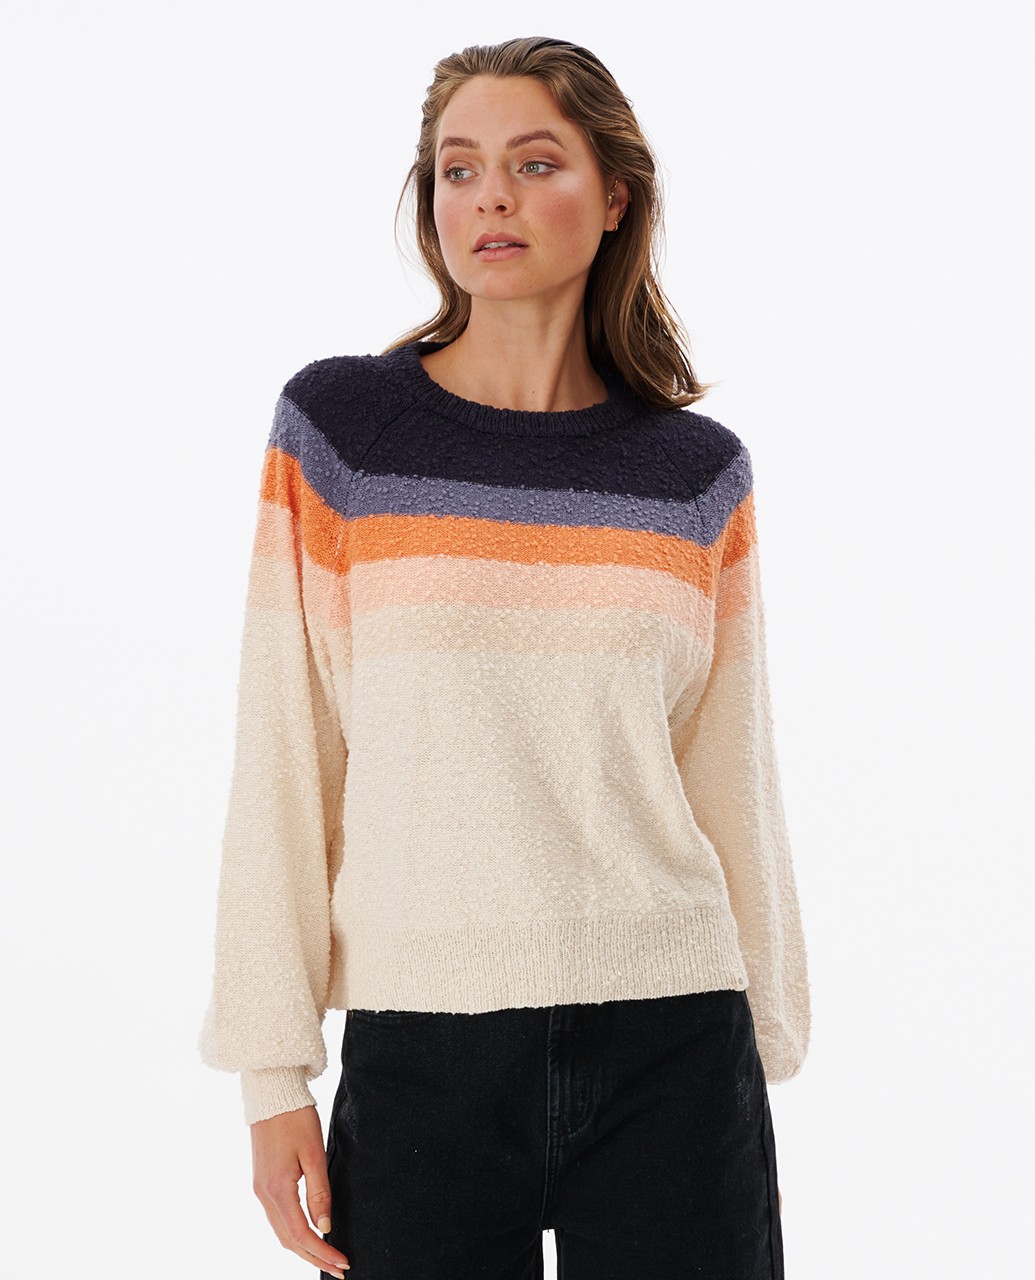 Rip Curl Melting Waves Sweater | Ozmosis | Knitwear